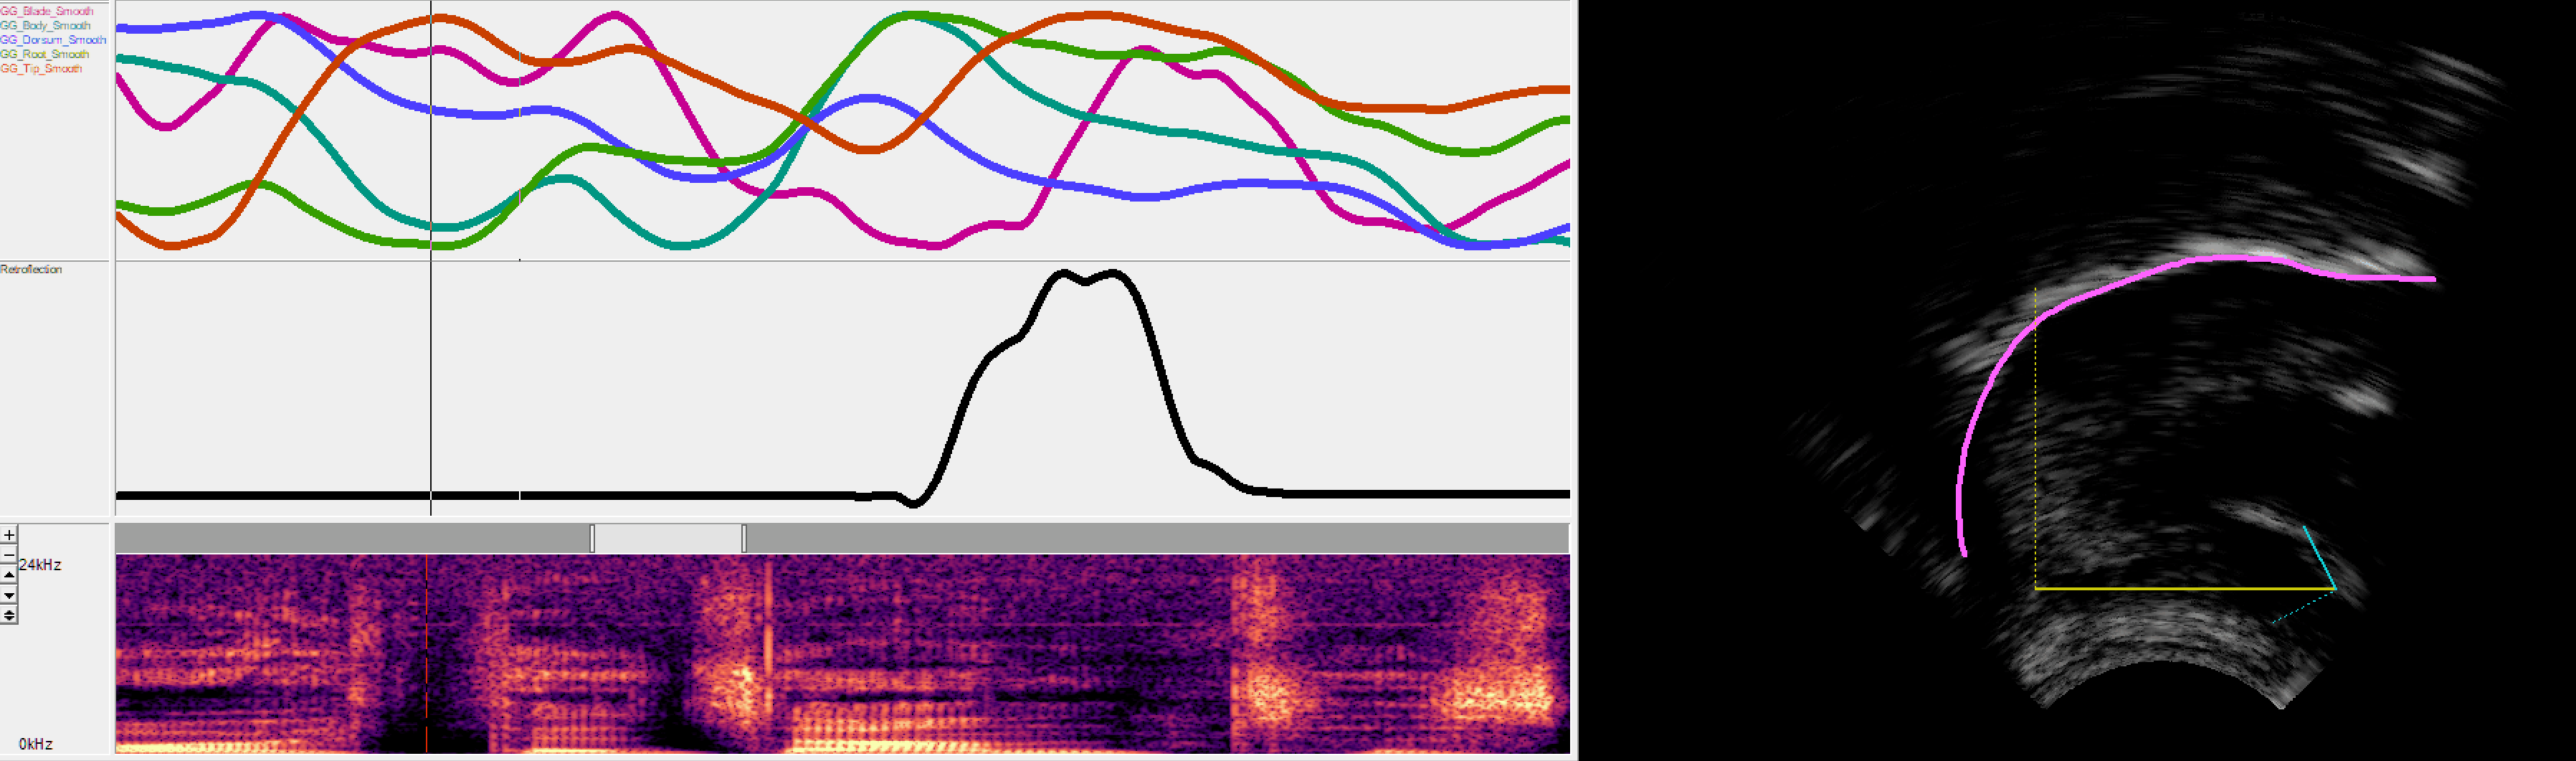 Animation showing multiple charts of analysis values which each show changing ultrasonic data over time